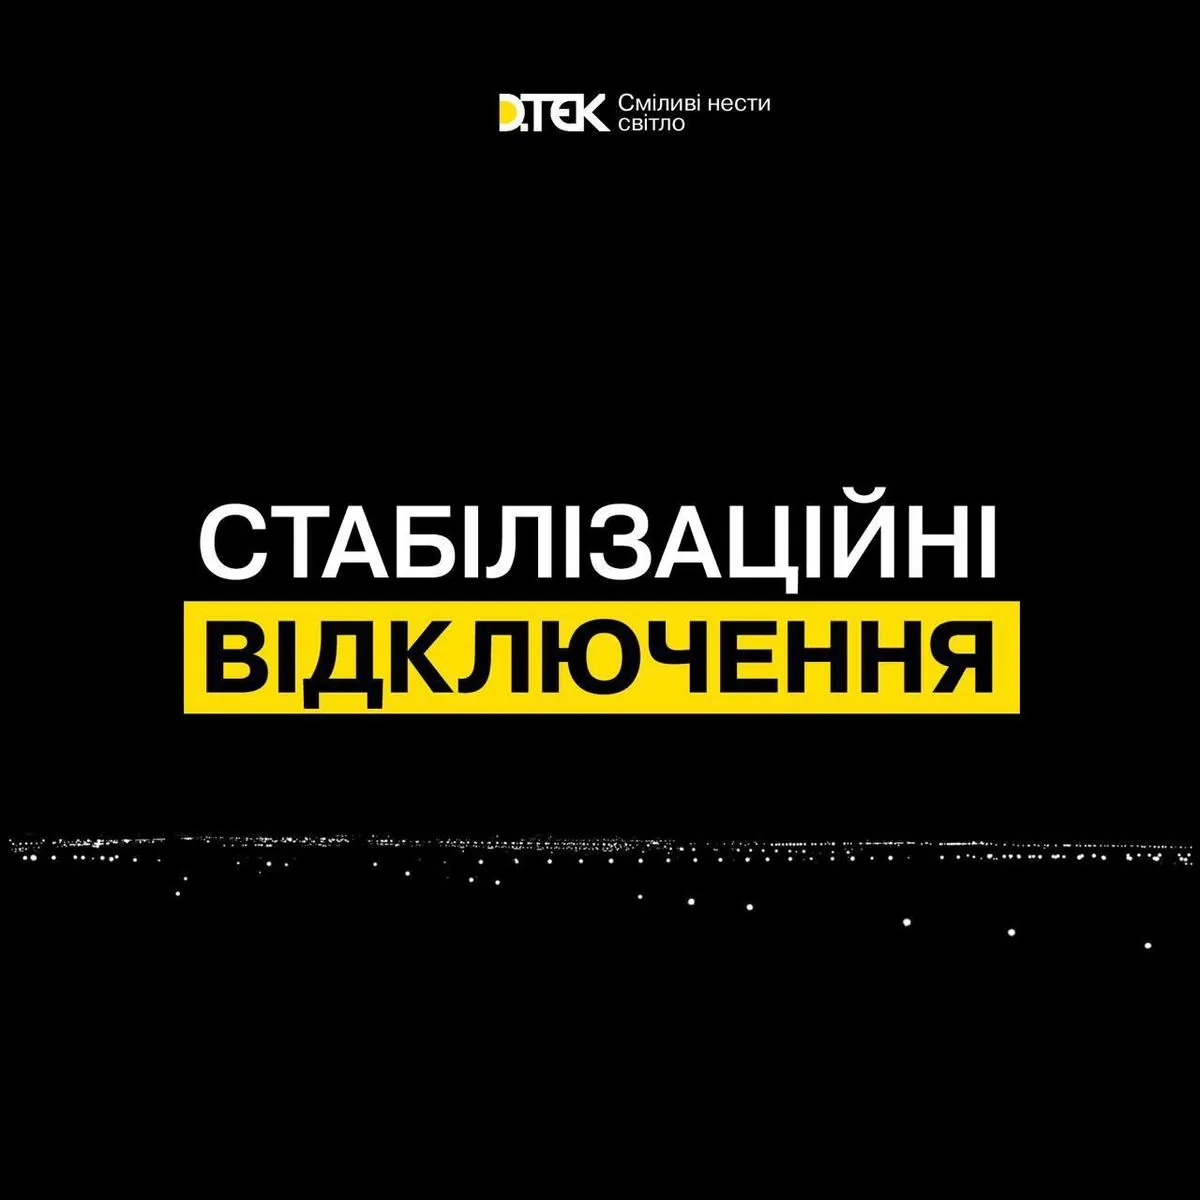 tomorrow-in-ukraine-blackout-schedules-will-be-in-effect-throughout-the-day